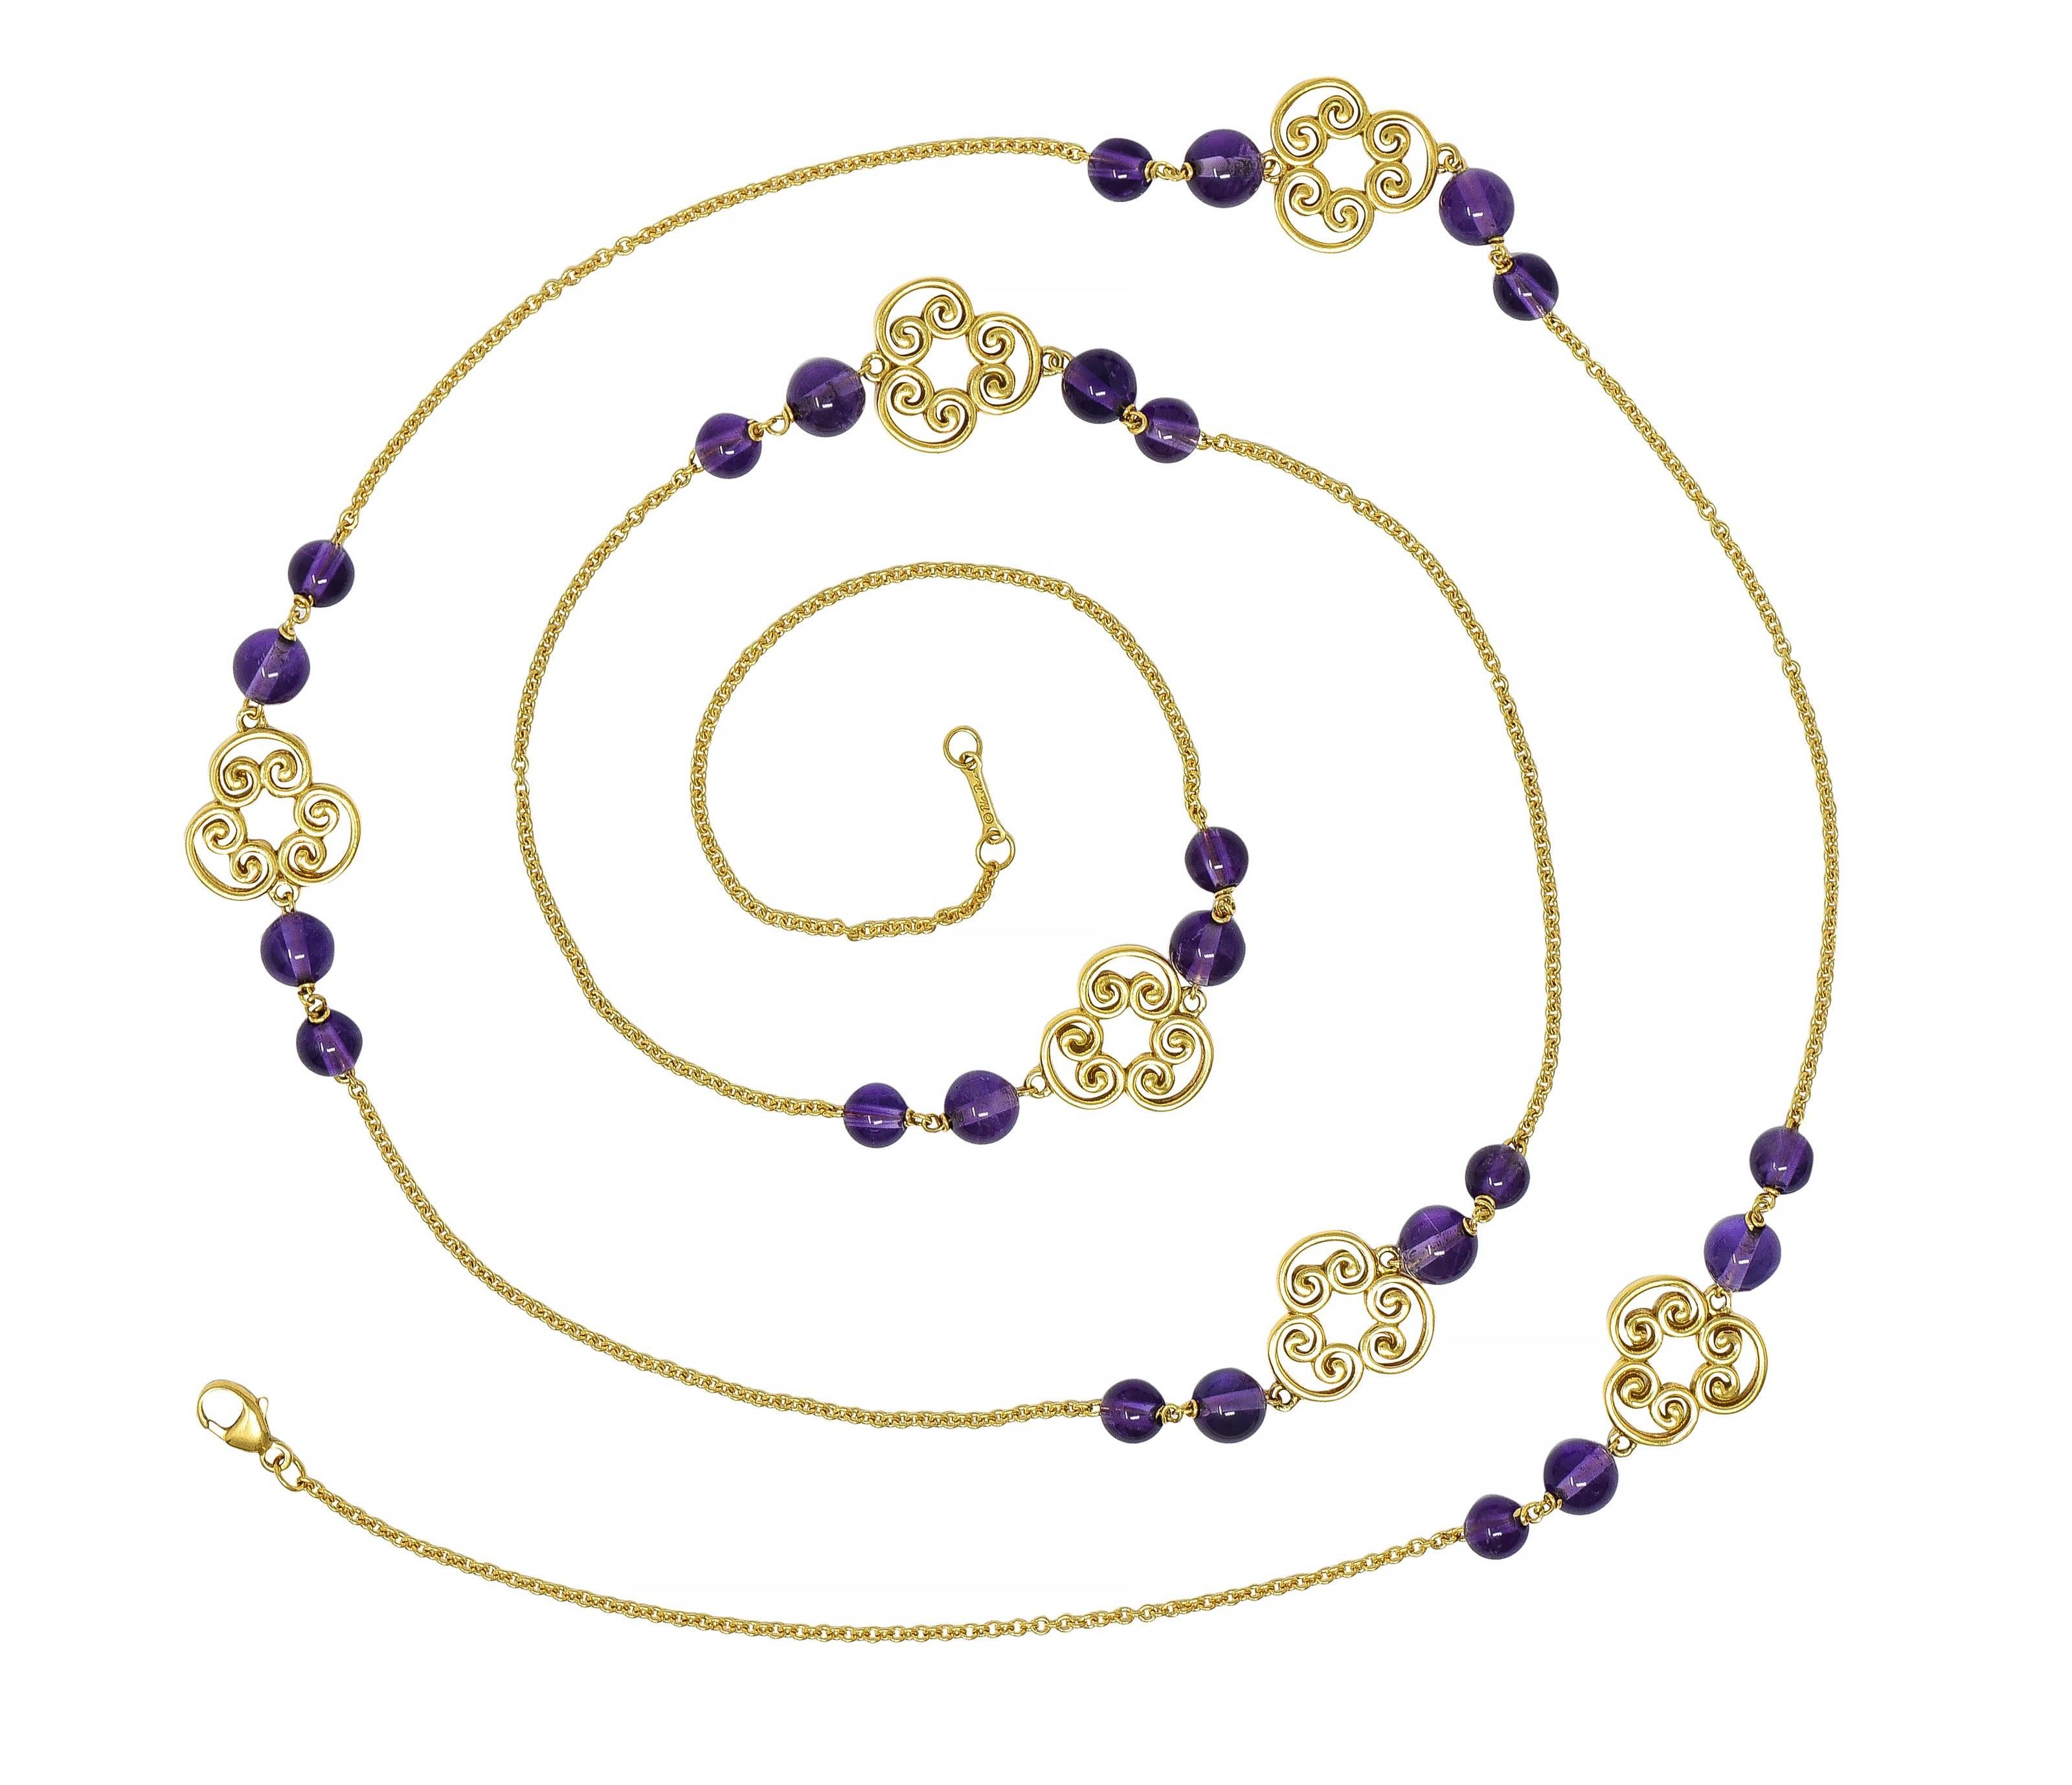 Designed as 1.5 mm cable link chain with six pierced 'Venezia' motif stations
Comprised of three joined scrolling whiplash motif forms  
Flanked by round amethyst beads ranging from 5.0 to 6.0 mm round
Transparent medium purple in color 
Completed